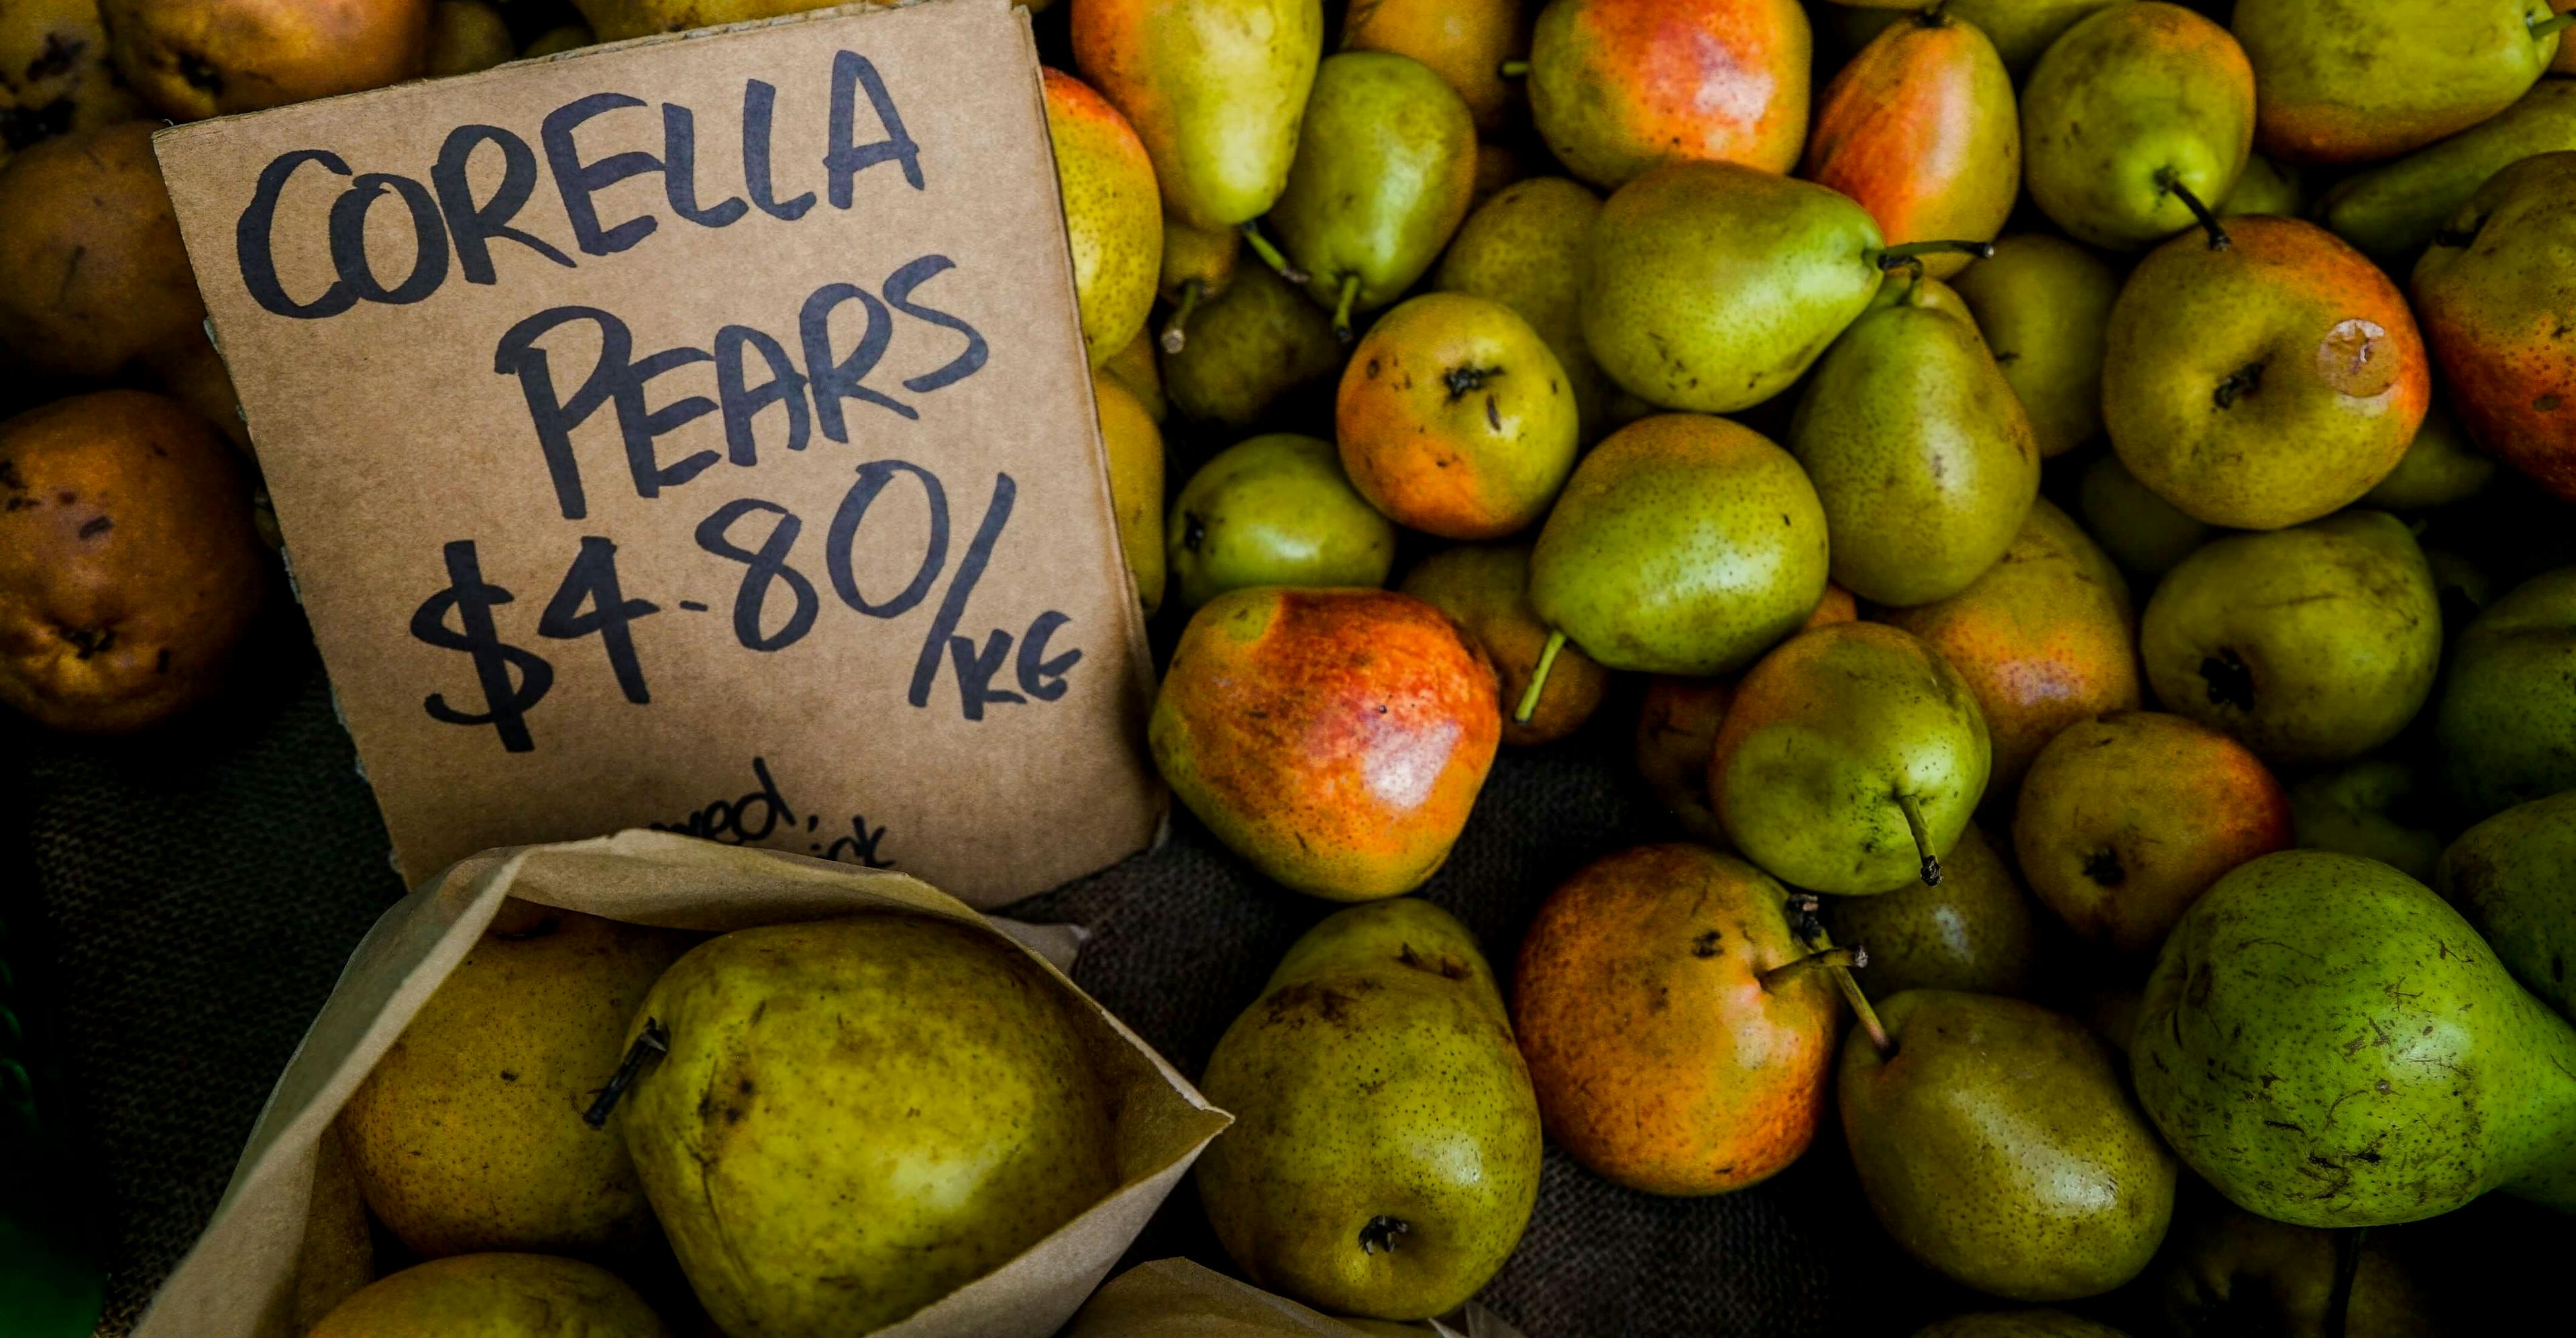 Pricing strategy: Corella pears in a grocery store with a pricing sign per kilo